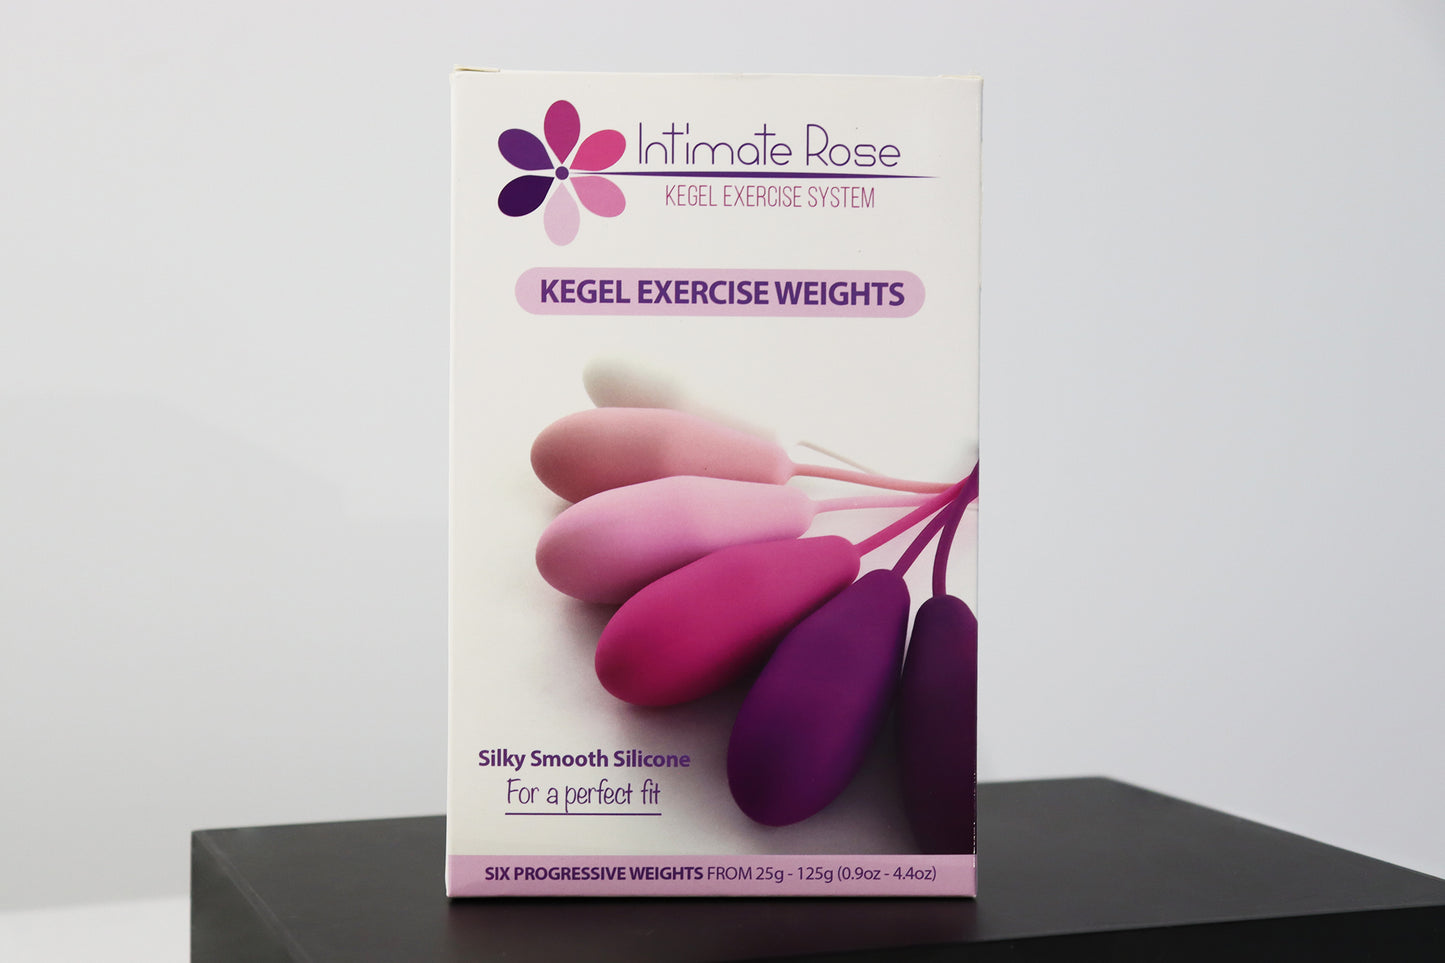 Intimate Rose - Kegel Exercise Weights